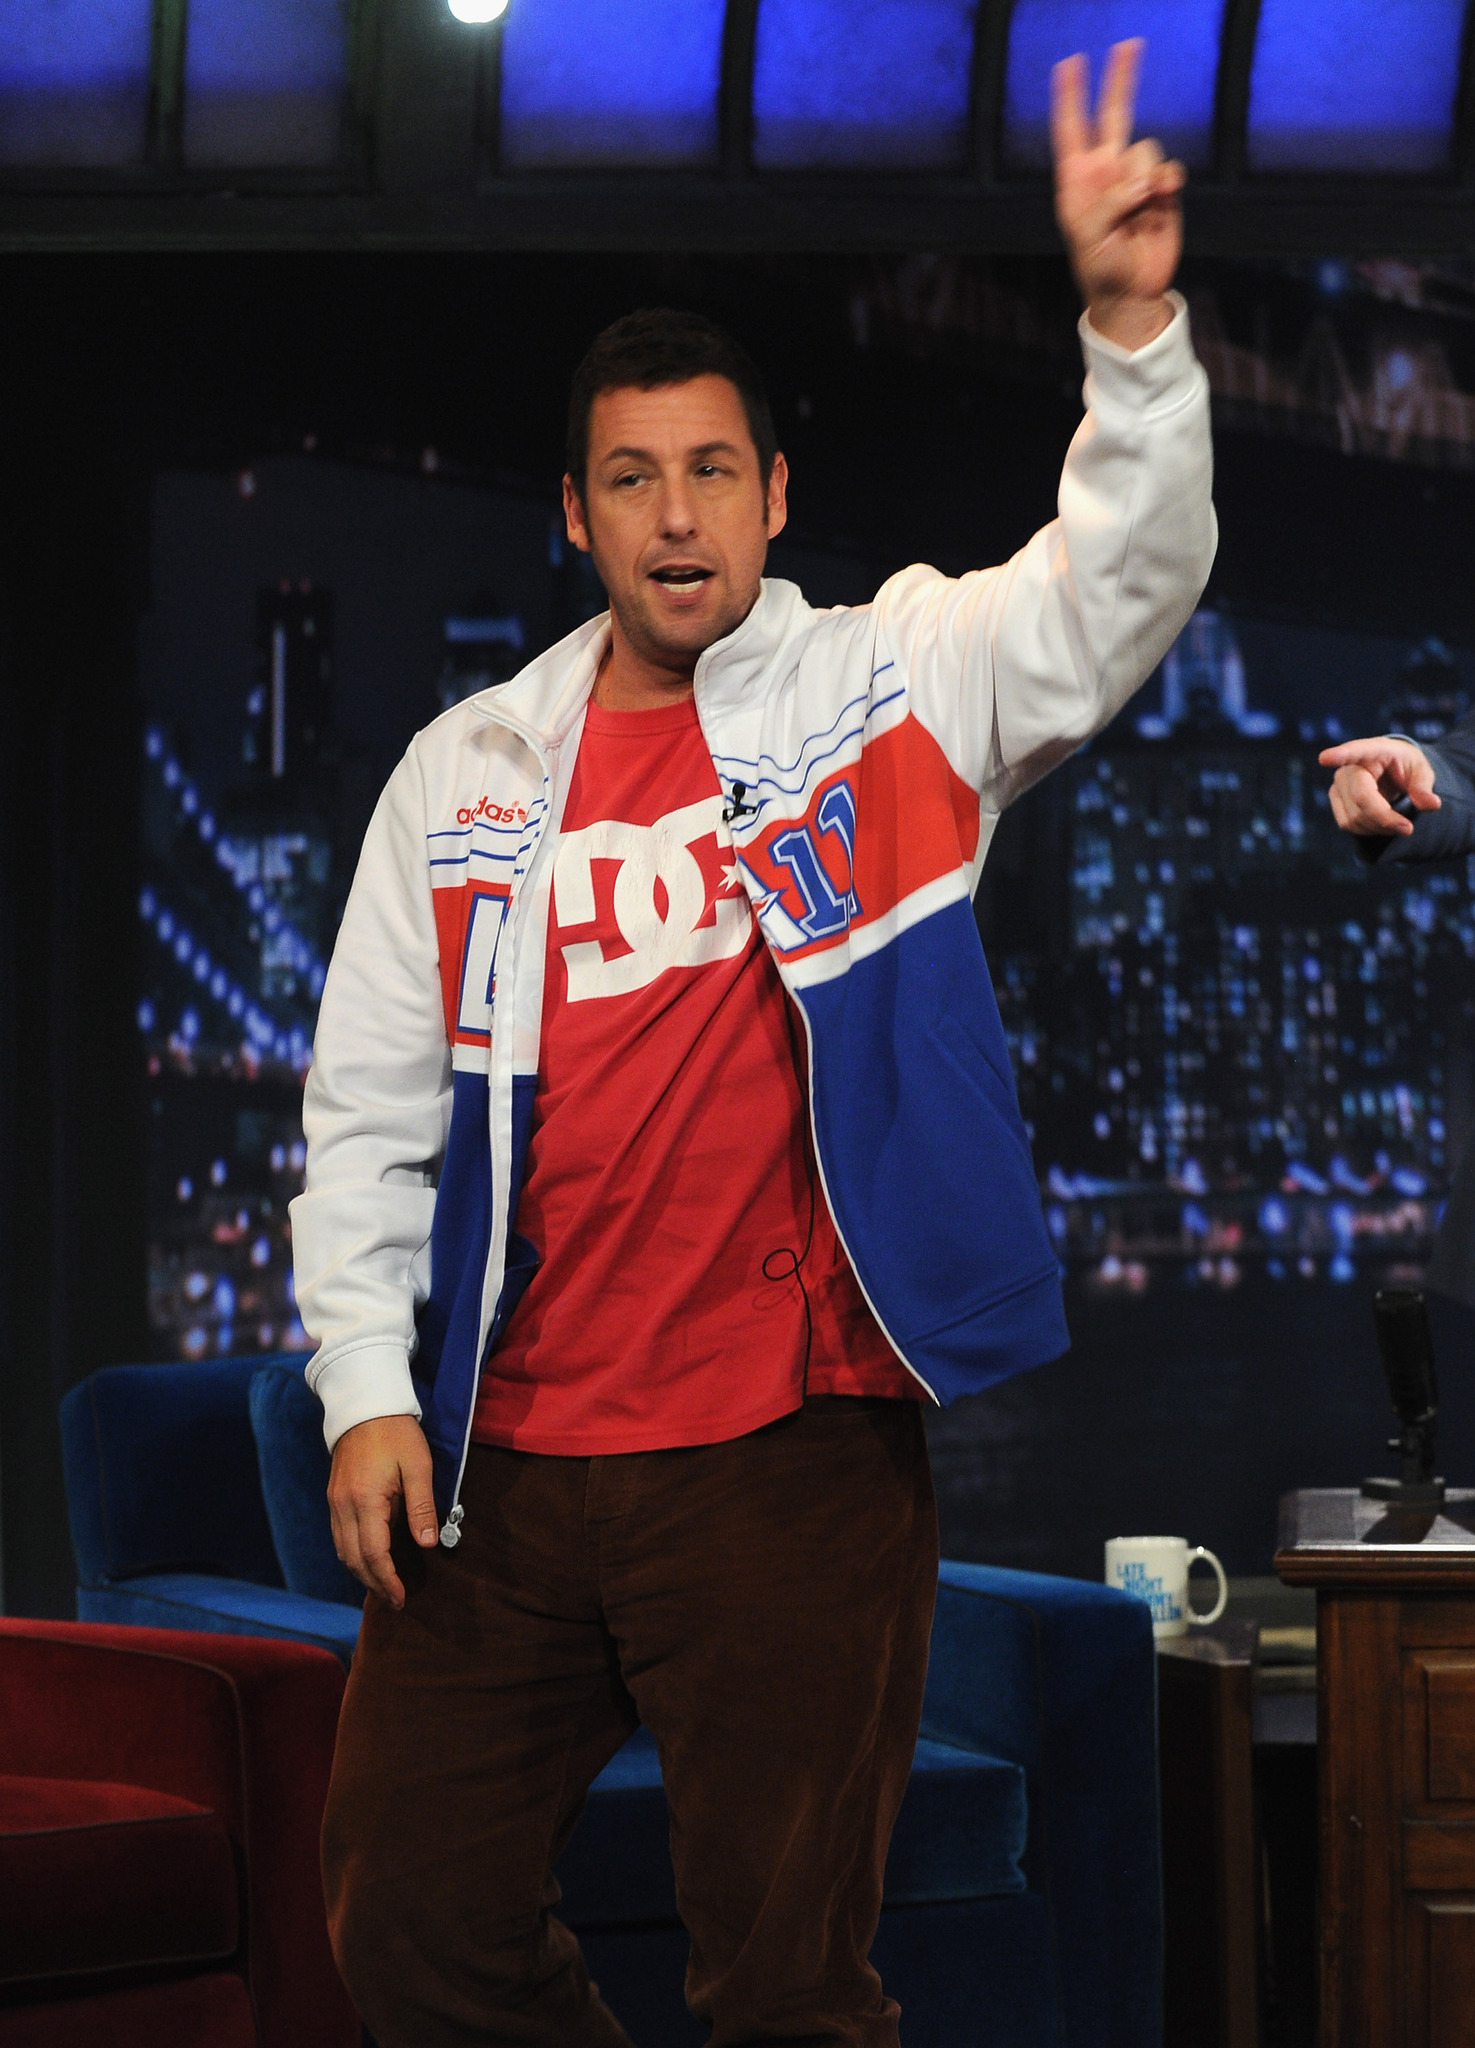 Adam Sandler at event of Late Night with Jimmy Fallon (2009)